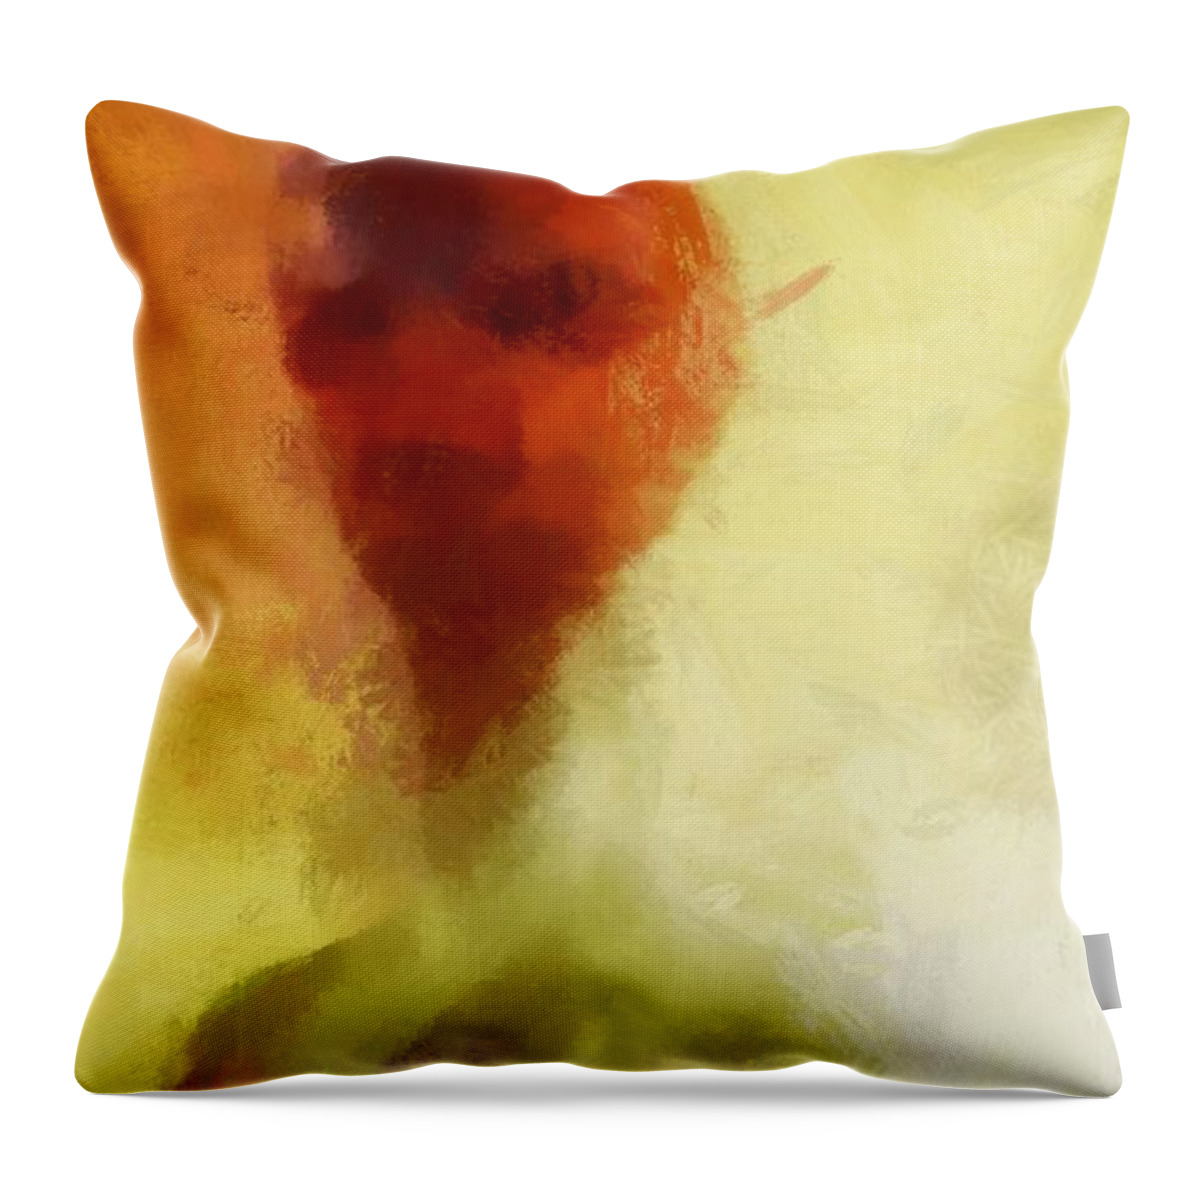 Ufo Throw Pillow featuring the painting Alien Red by Esoterica Art Agency